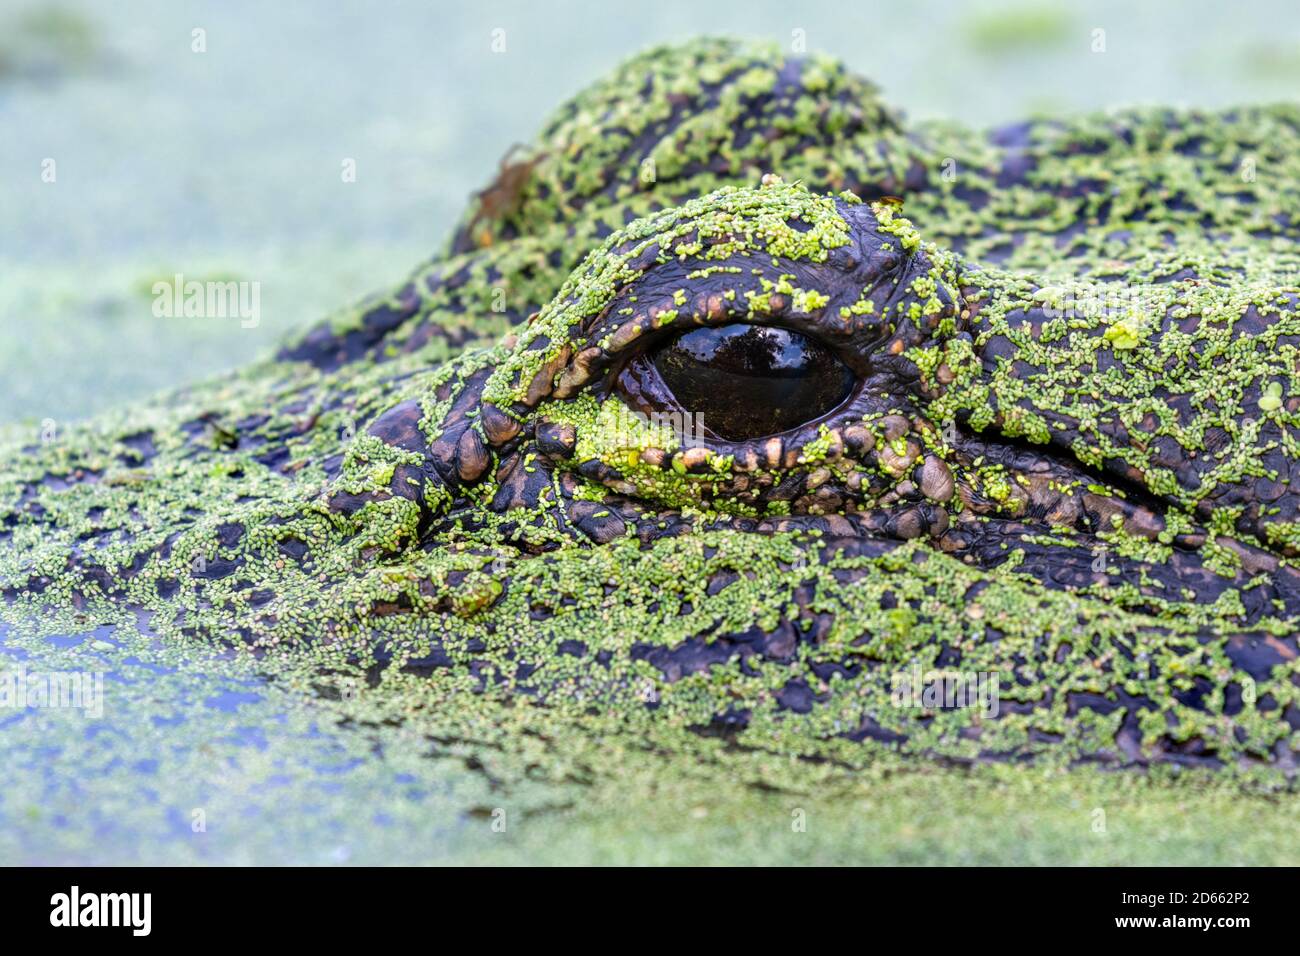 American alligator (Alligator mississippiensis) hiding in a swamp under duckweed, Brazos Bend state park, Texas, USA. Stock Photo